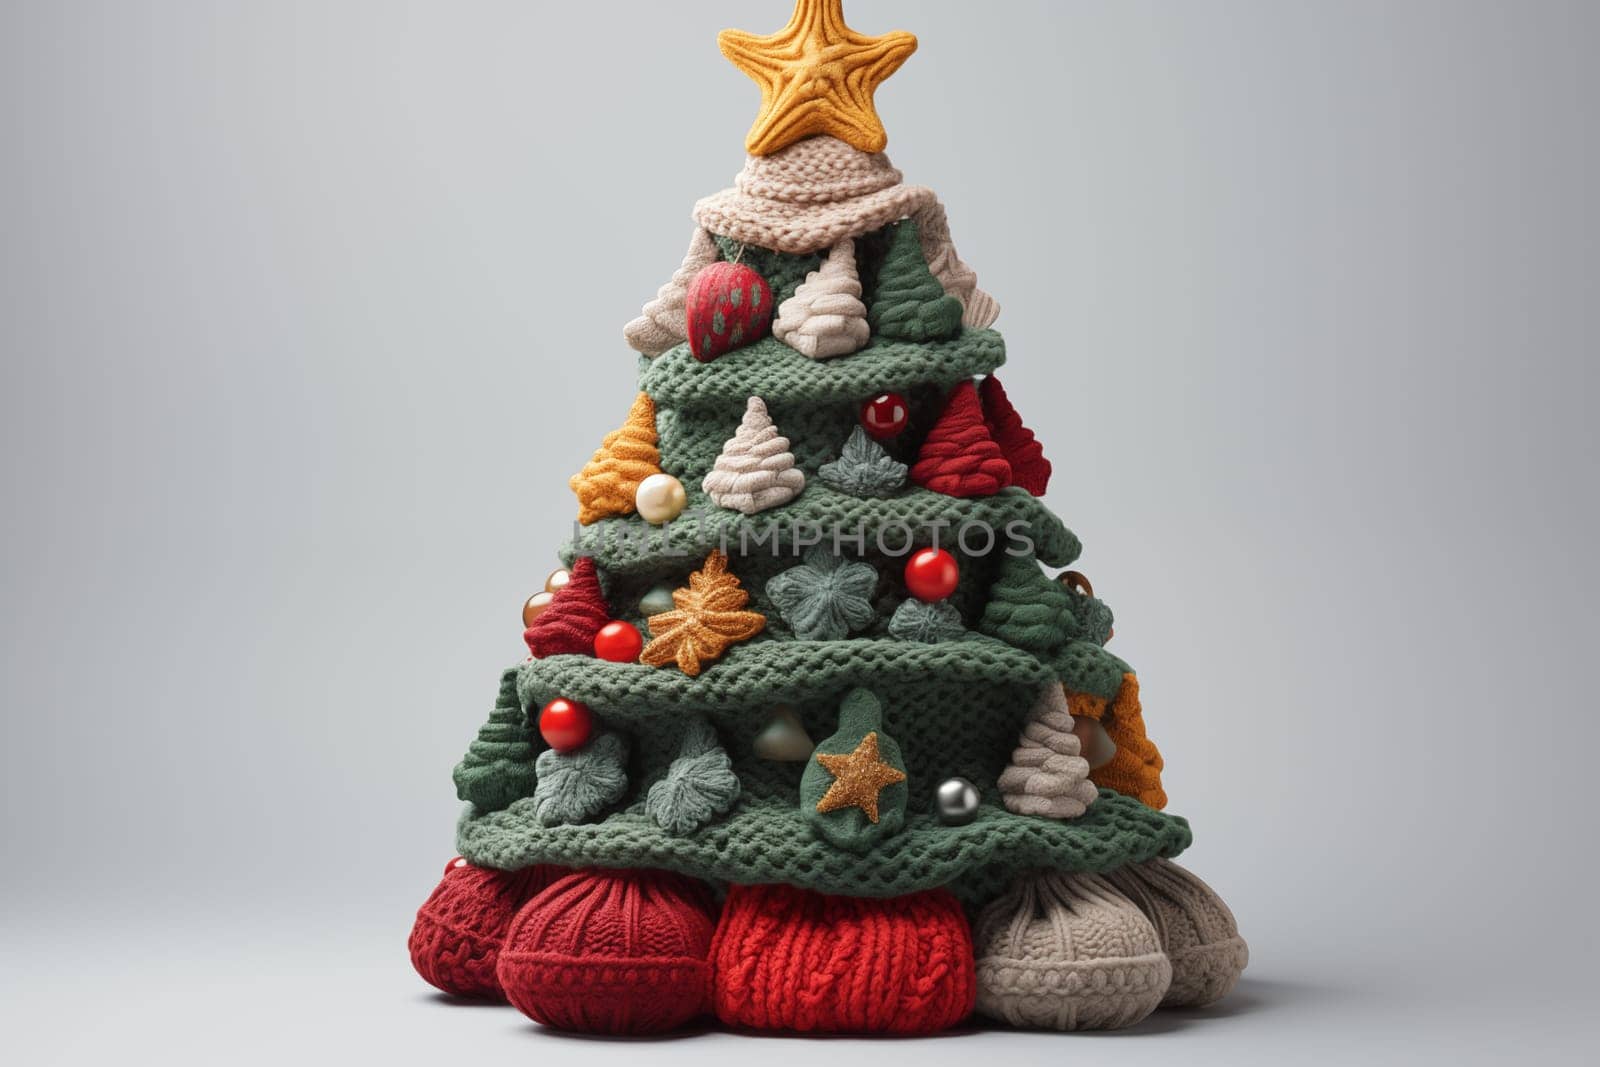 Creative knitted green Christmas tree stand on a gray background.